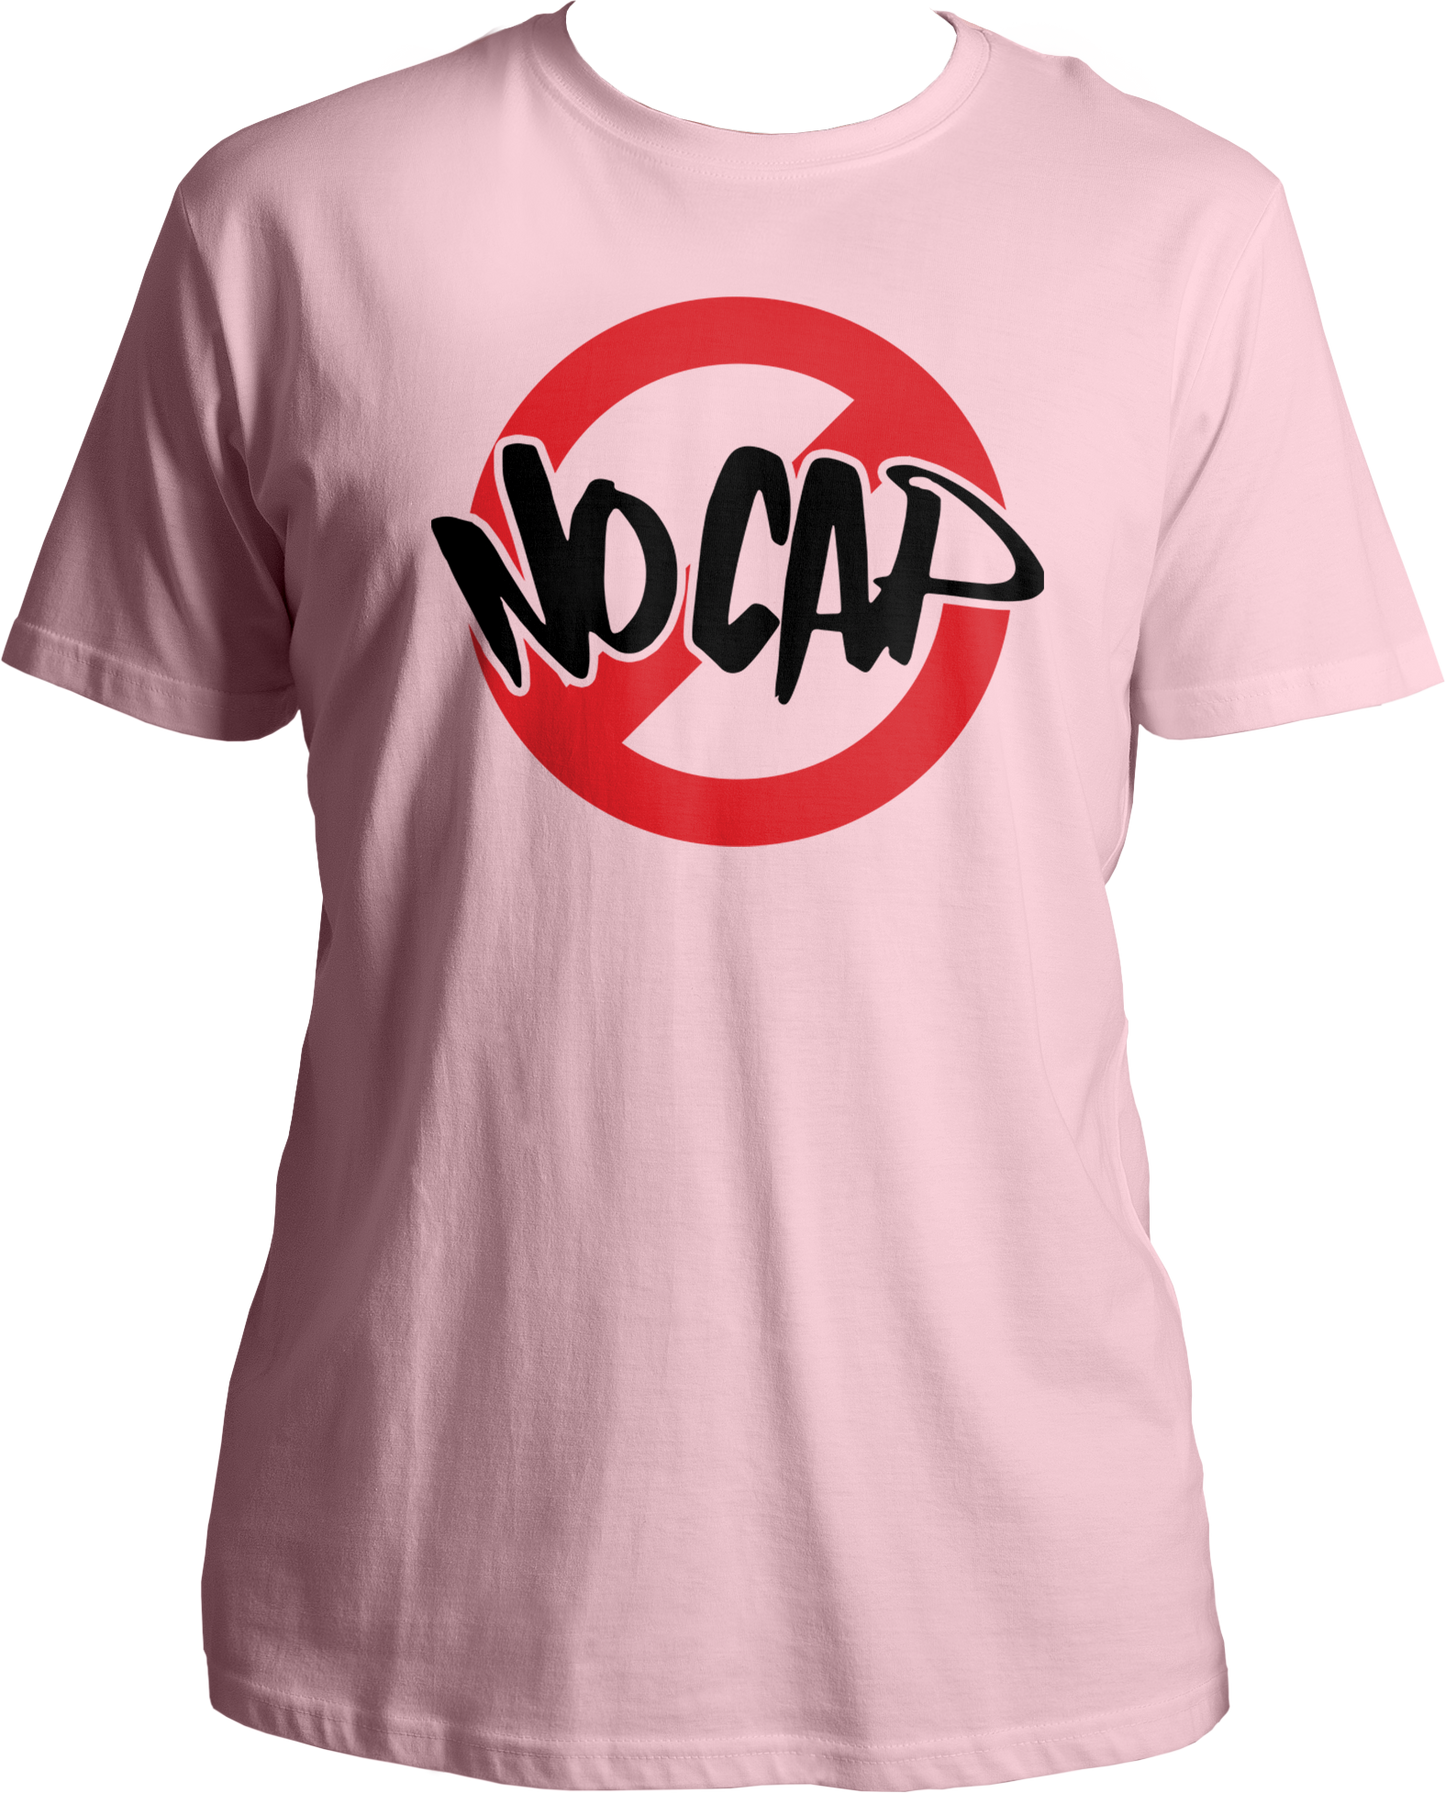 Step up your style game with the No Cap Unisex Cotton T-Shirt, straight outta Kr$na's lyrical universe. This tee's got the swagger, the flow, and the vibe, just like the man himself. You know when Kr$na drops bars, it's all fire, no cap, and this shirt's no different.